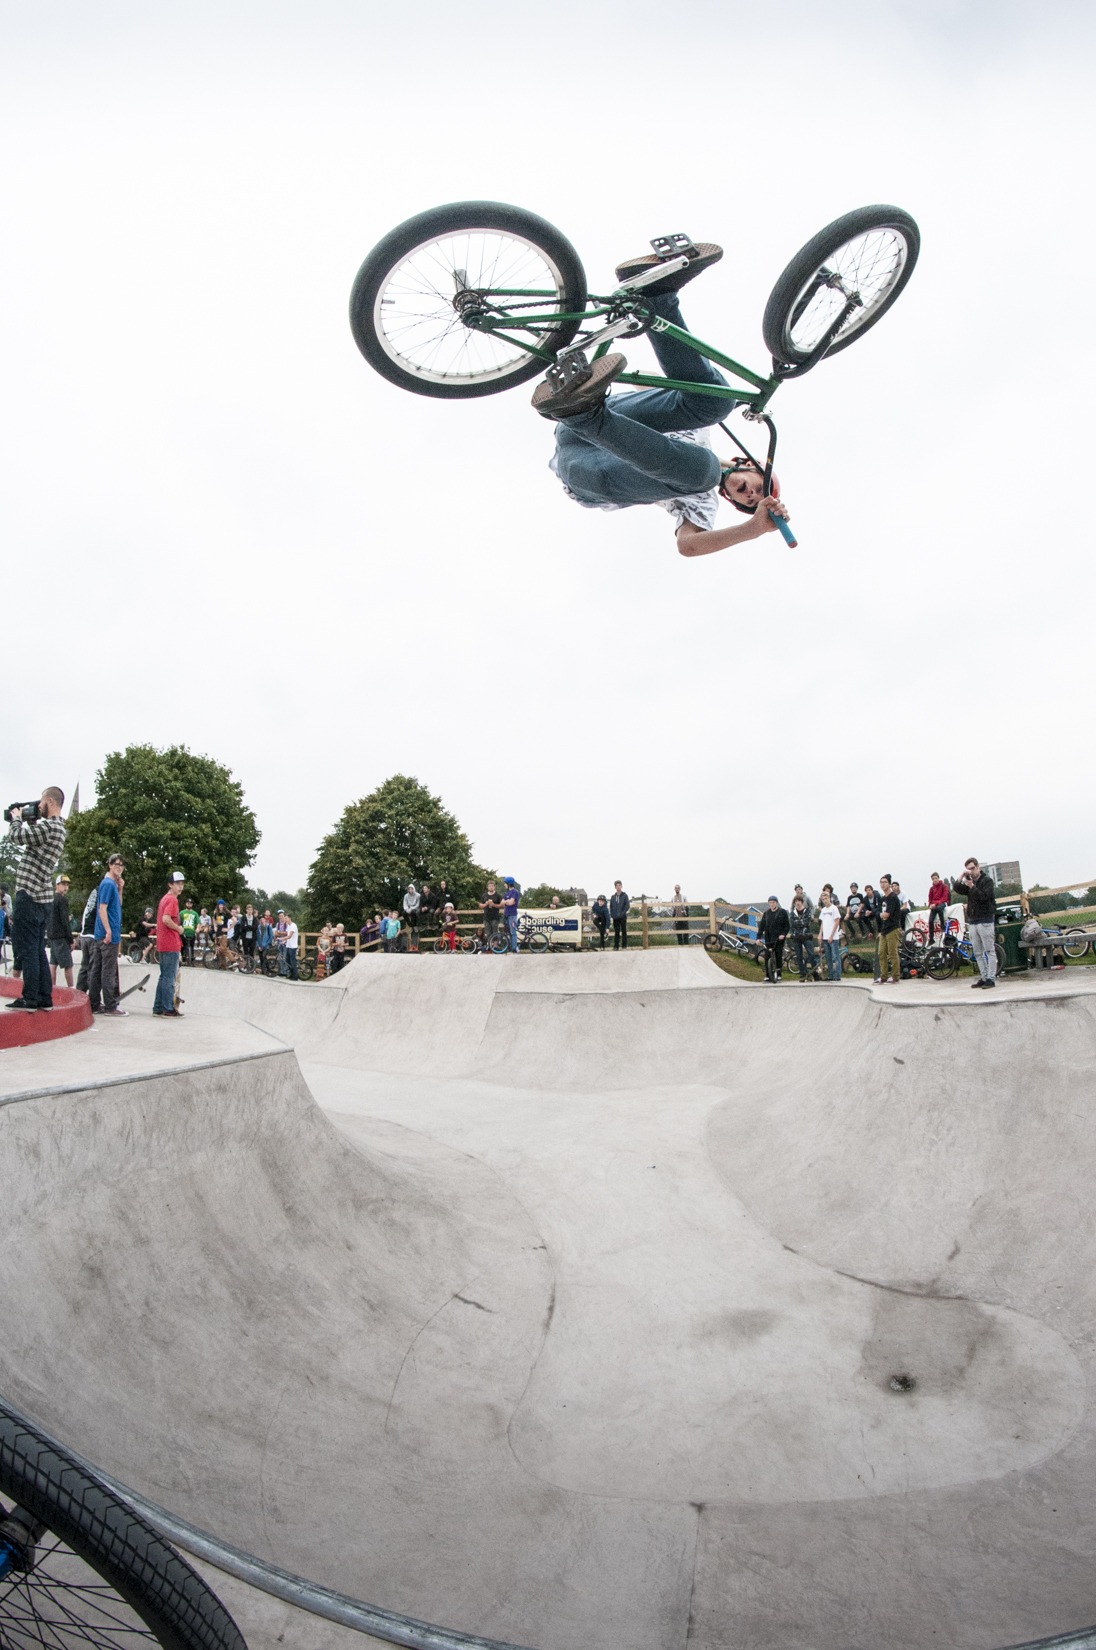 Reece Parr, big boost in bowl - DEATH Photo